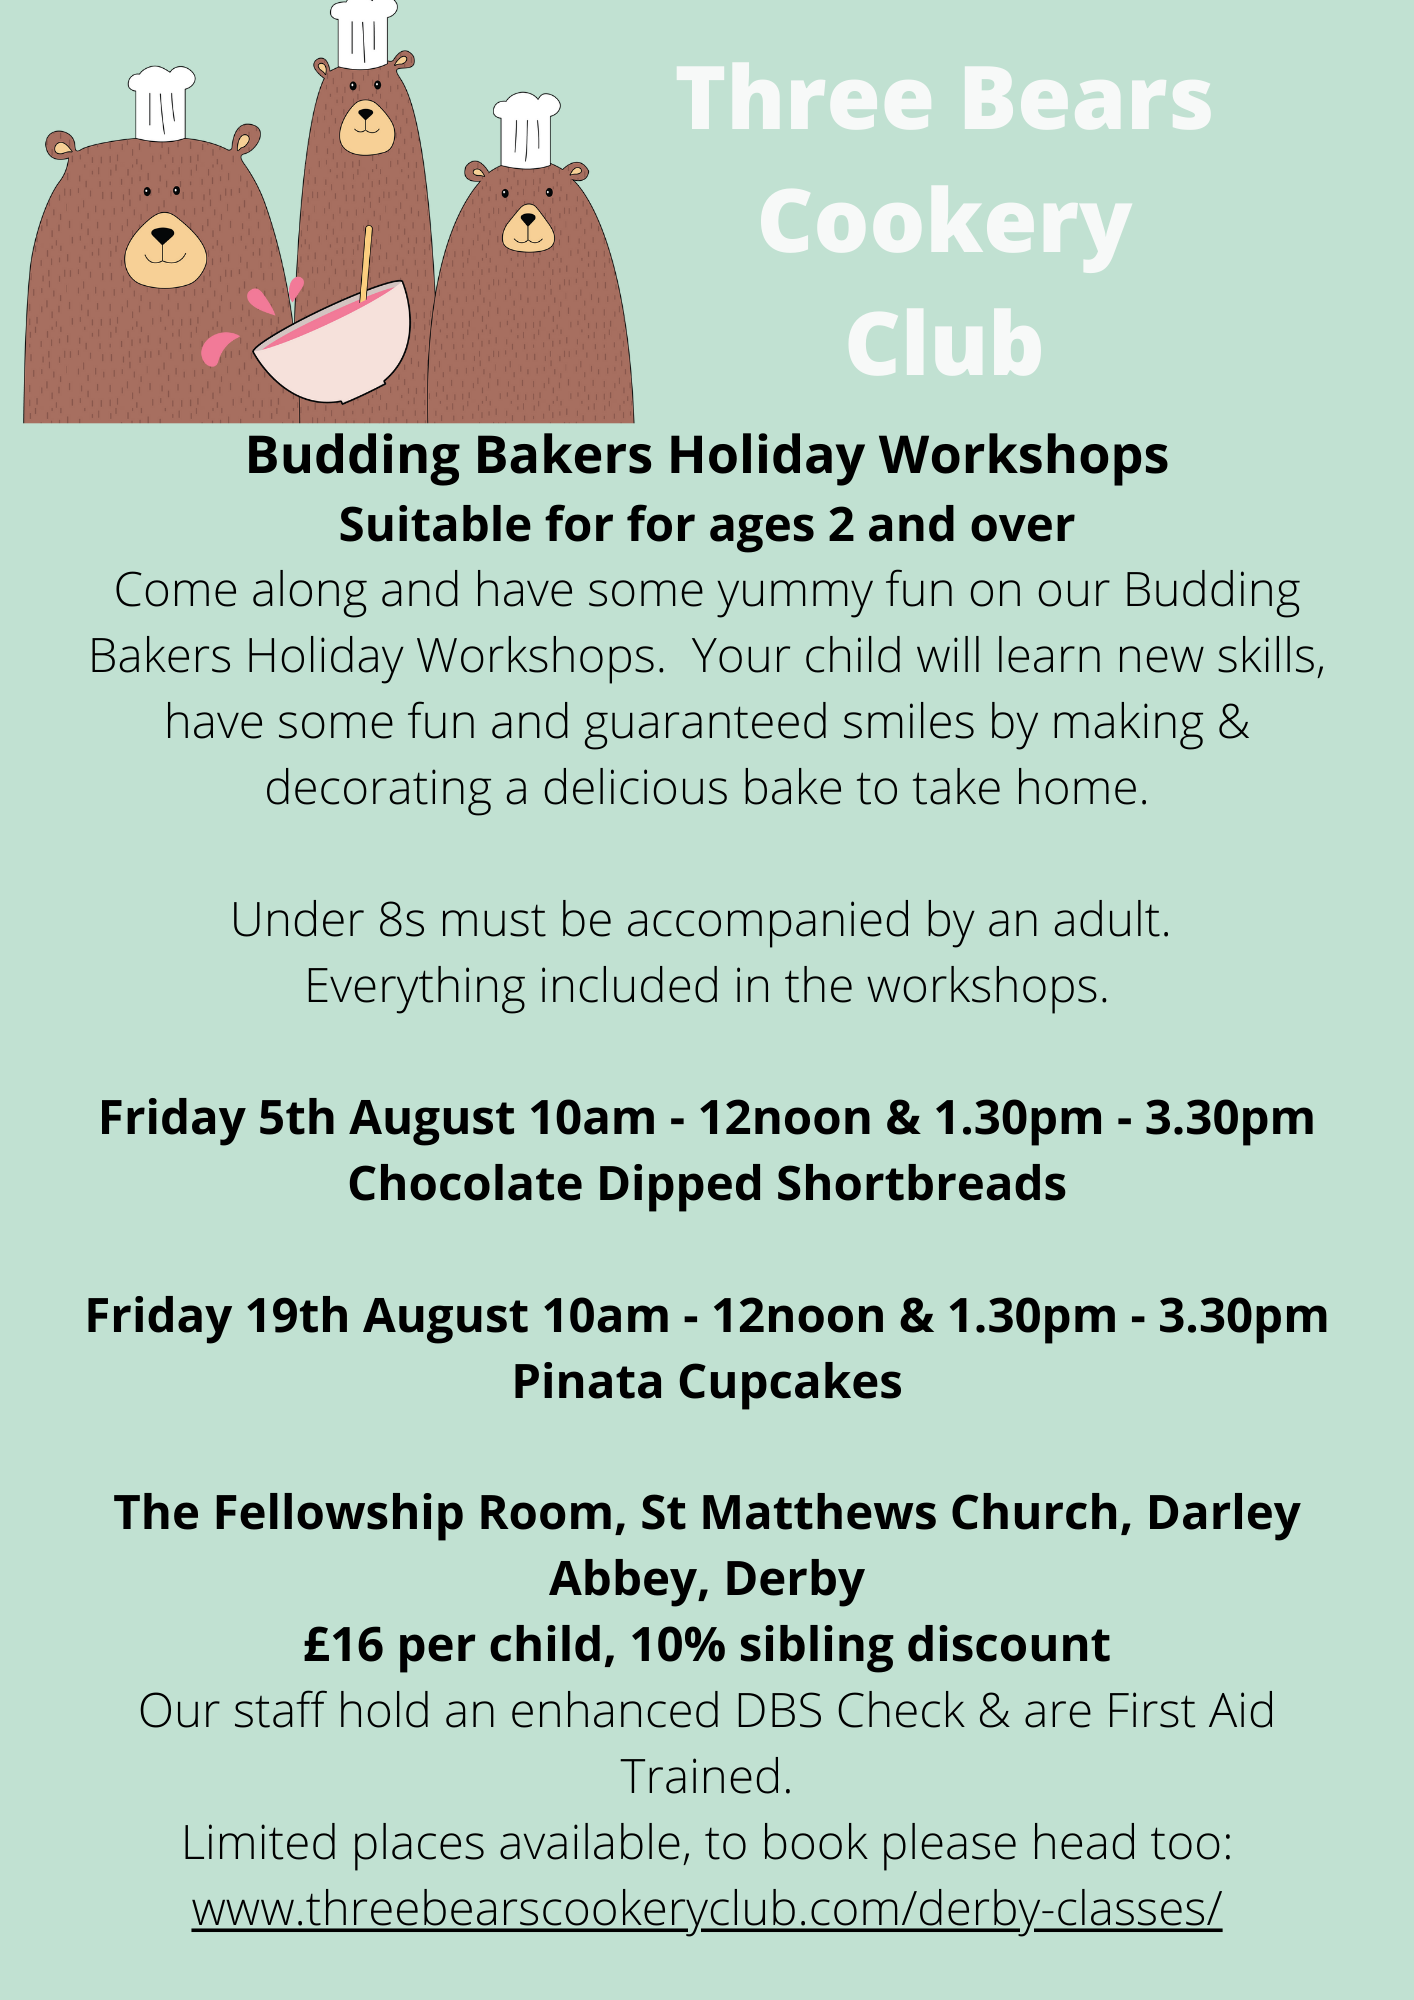 Three Bears Cookery - Budding Bakers Summer Workshops - Derby Days Out